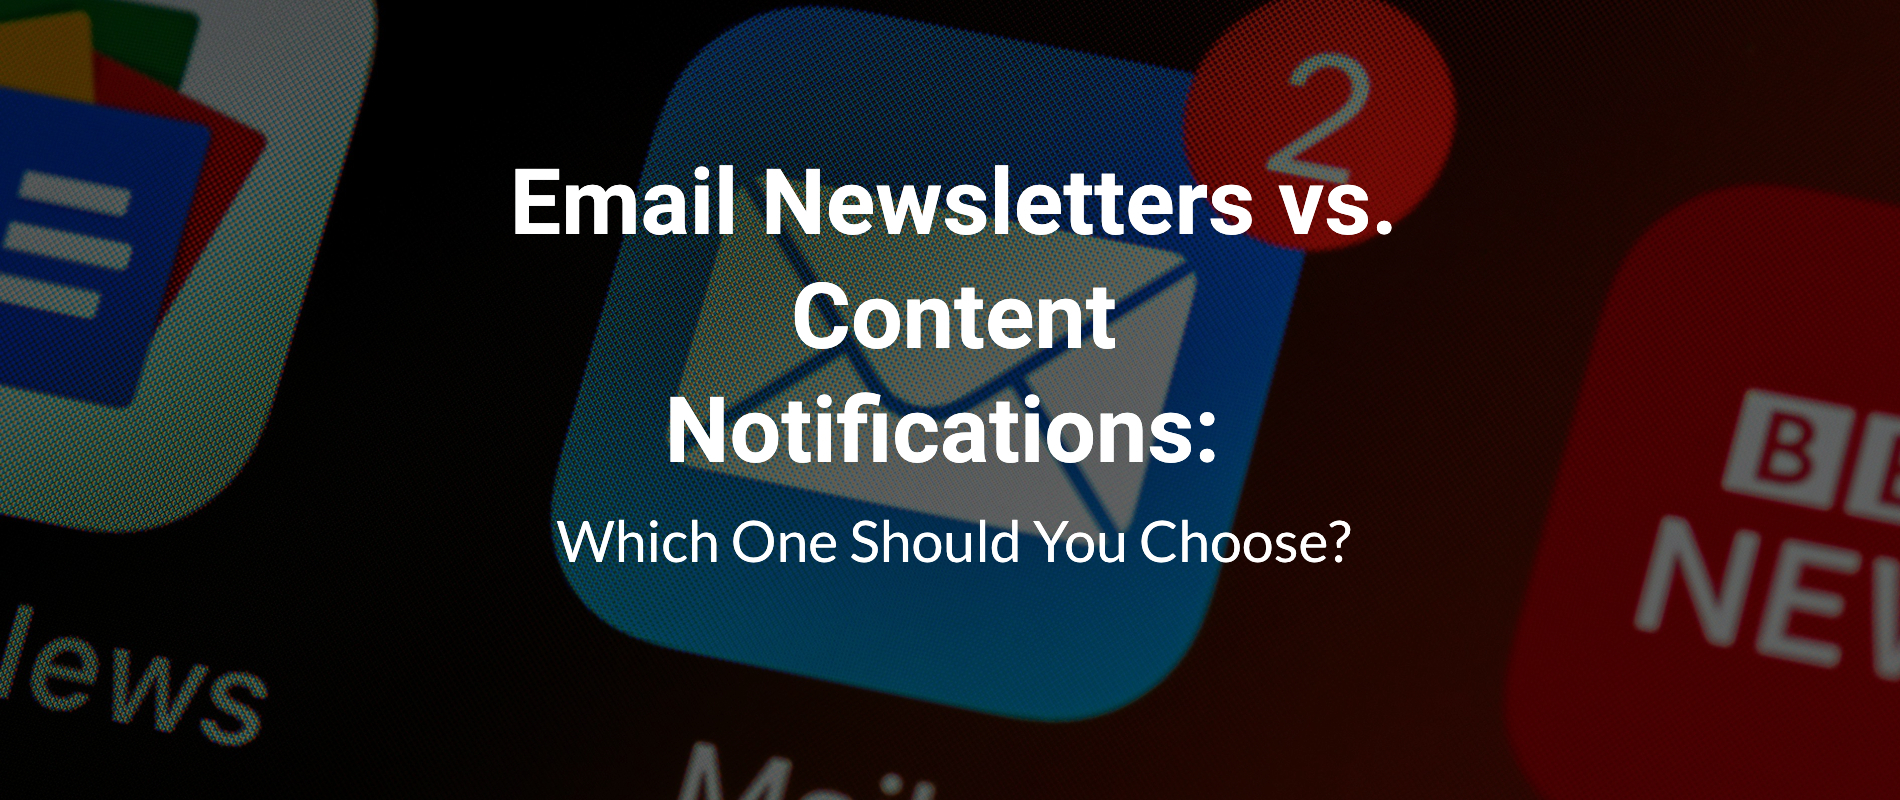 Email Newsletters vs. Content Notifications